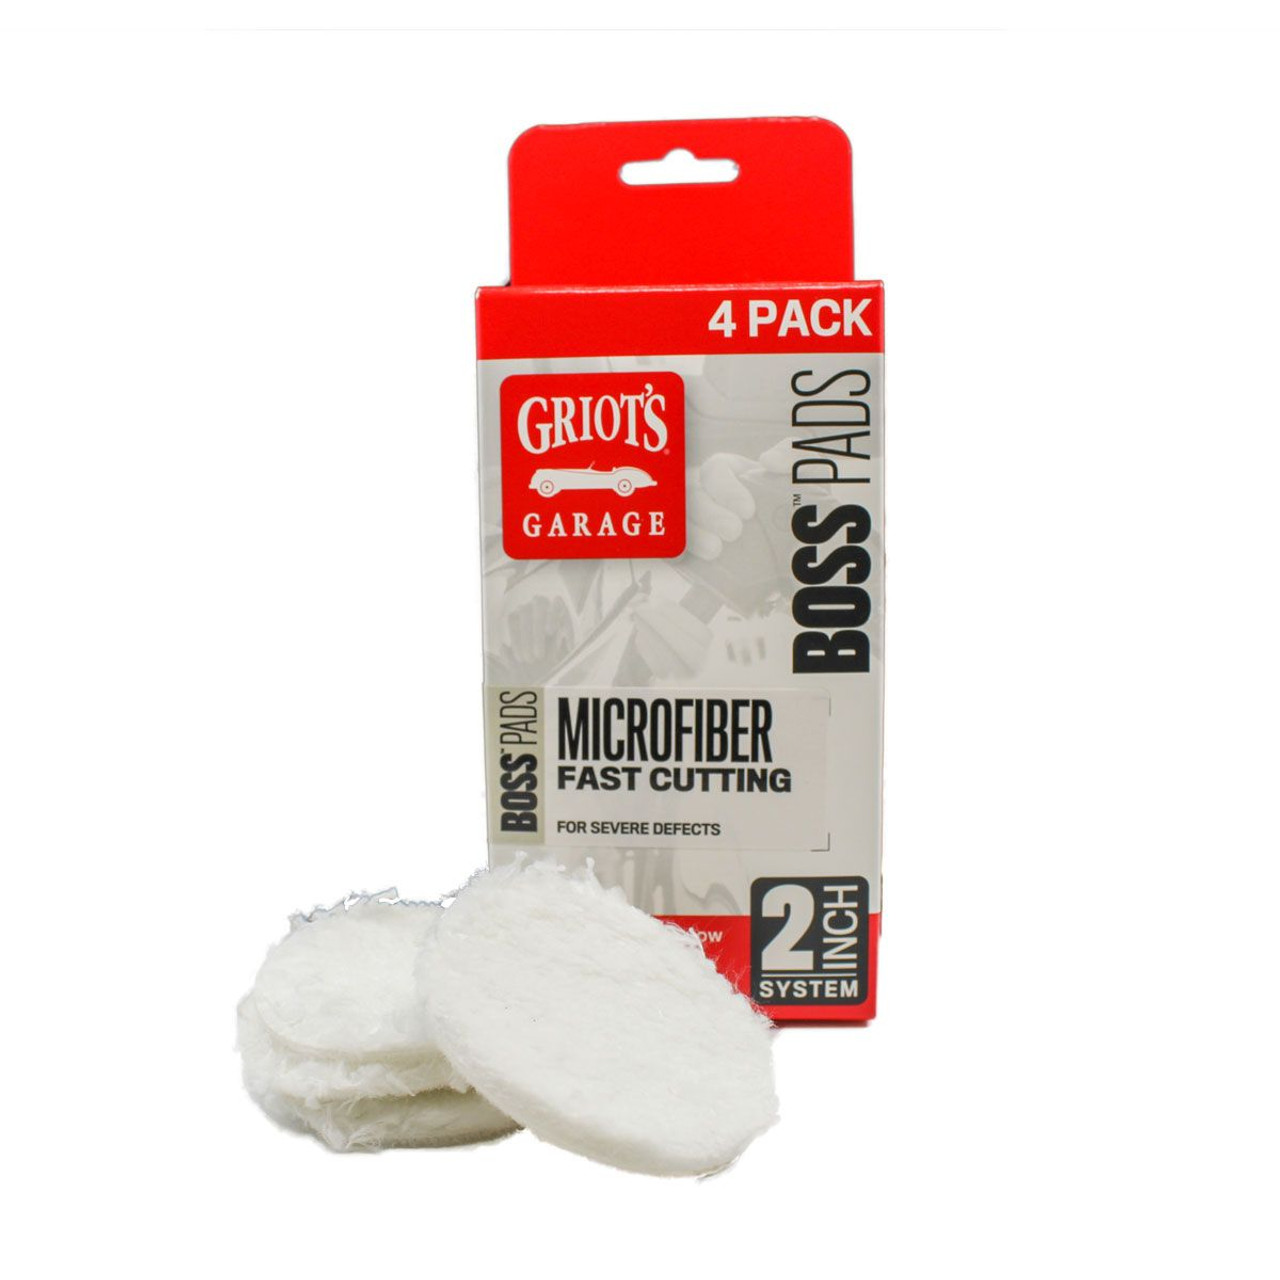 Griots Garage BOSS 2 inch Microfiber Fast Cutting Pads – 4 Pack 